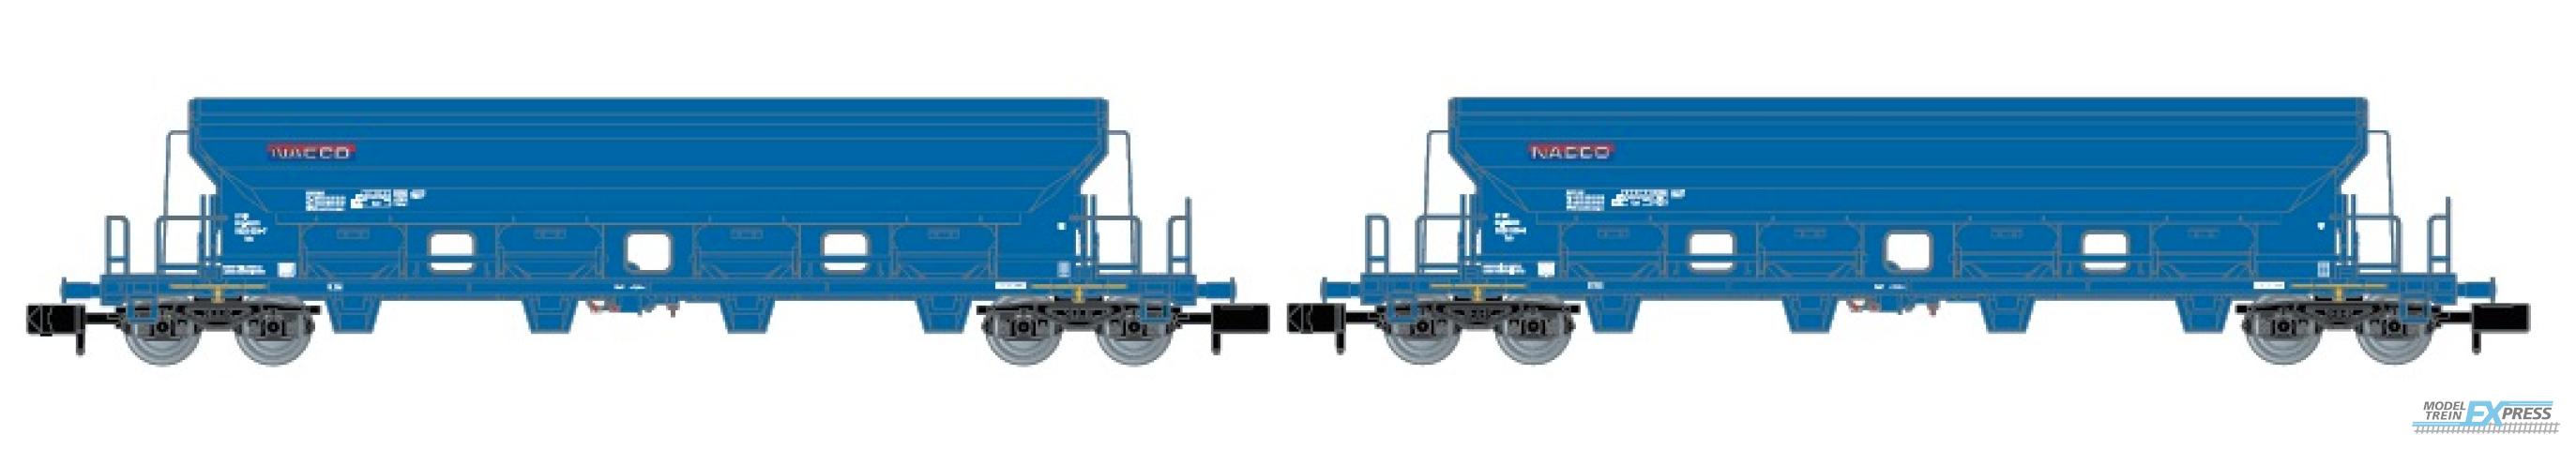 Arnold 6390 NACCO, 2-unit set 4-axle hopper wagons with sliding roof Tads, blue livery, period VI